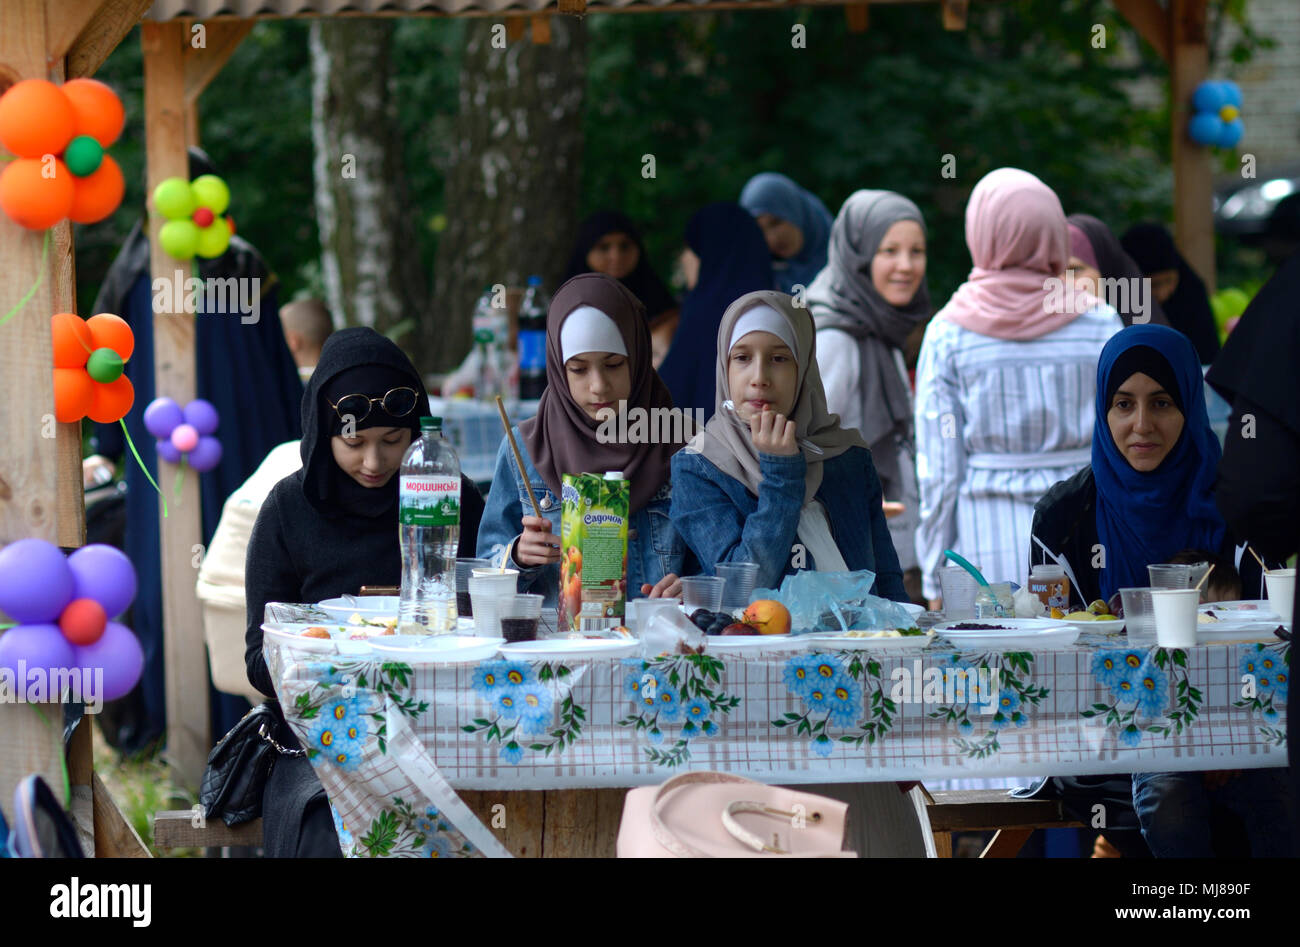 Muslim women in hijabs sitting at a table set with food. Celebration of Hidirellez (festival of arrival of spring).  Kiev, Ukraine Stock Photo